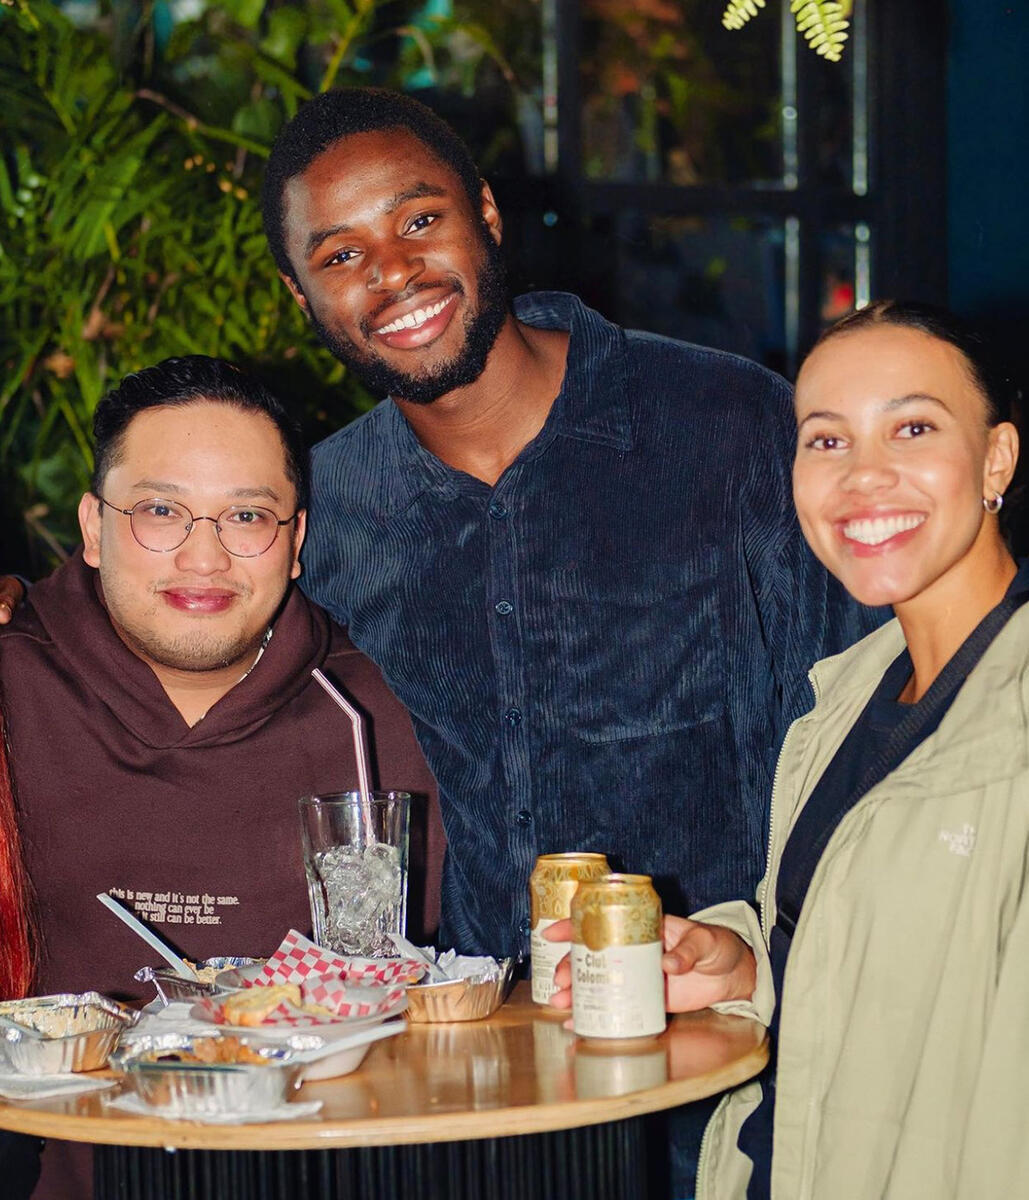 Tellem (center) standing with two friends at a round table with drinks and food in Bogotá